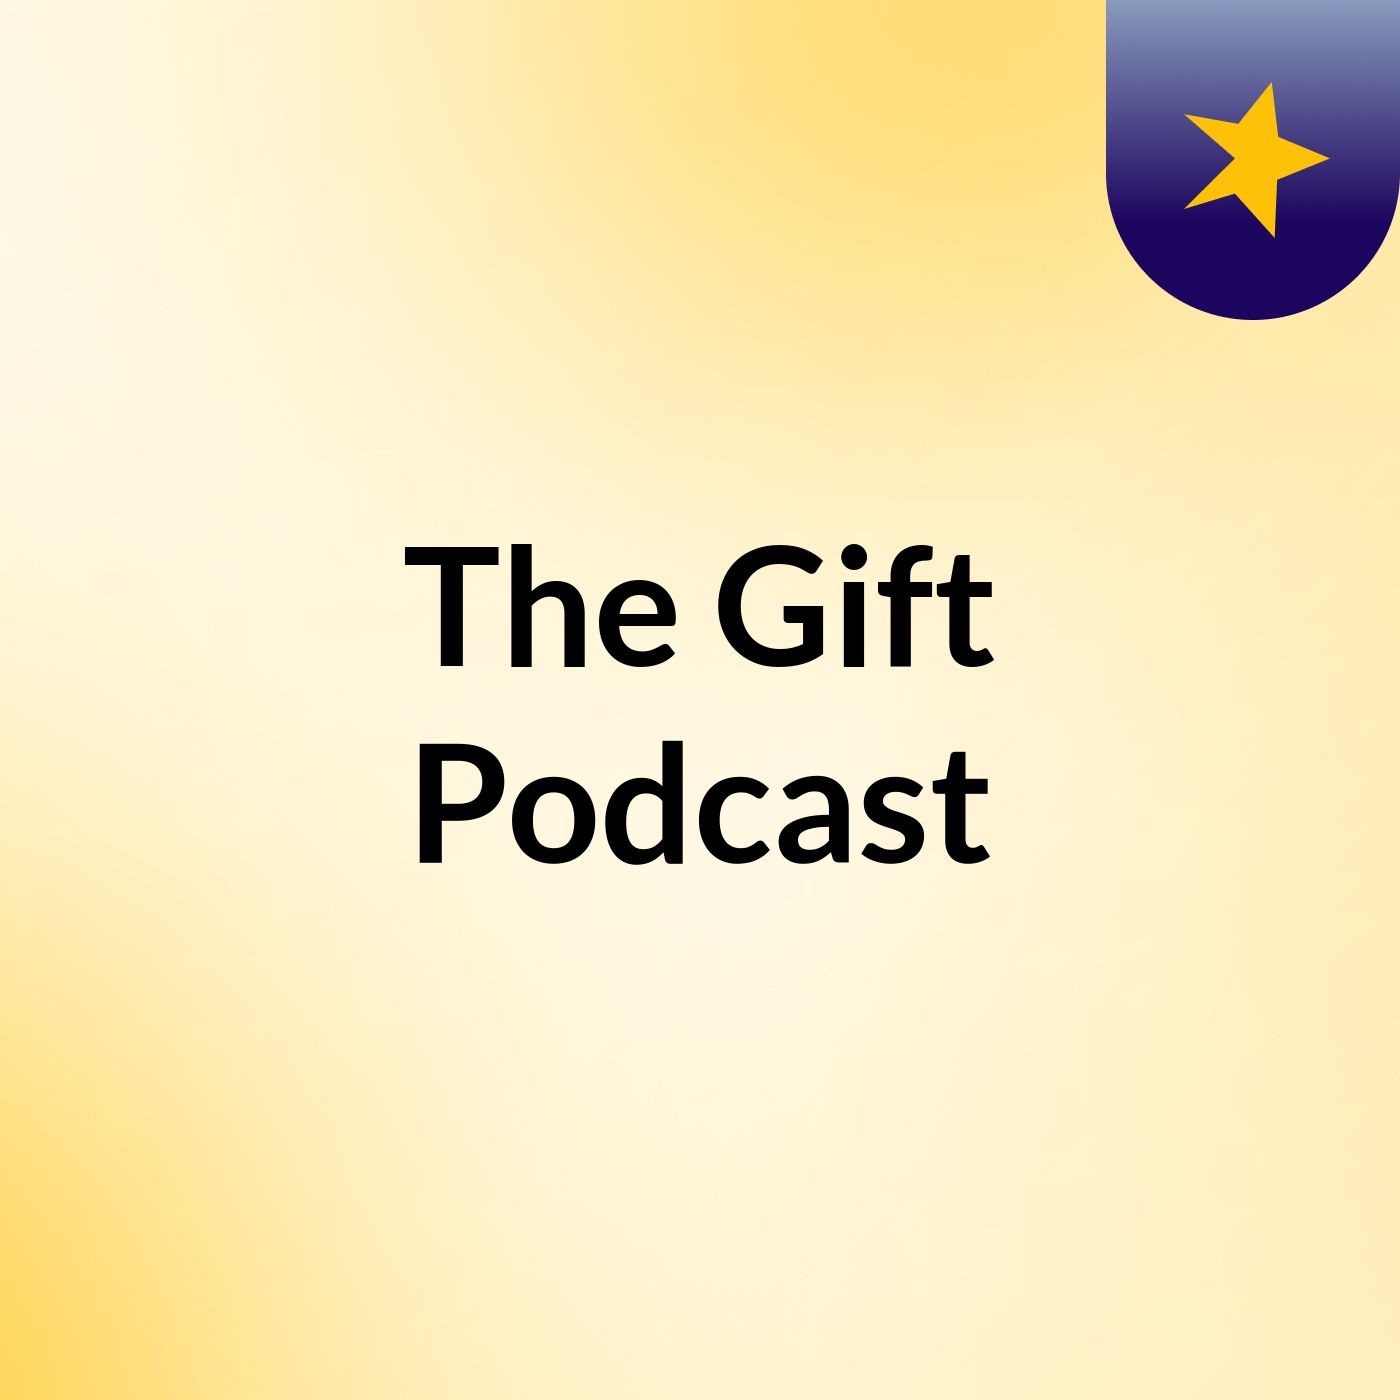 The Gift Podcast